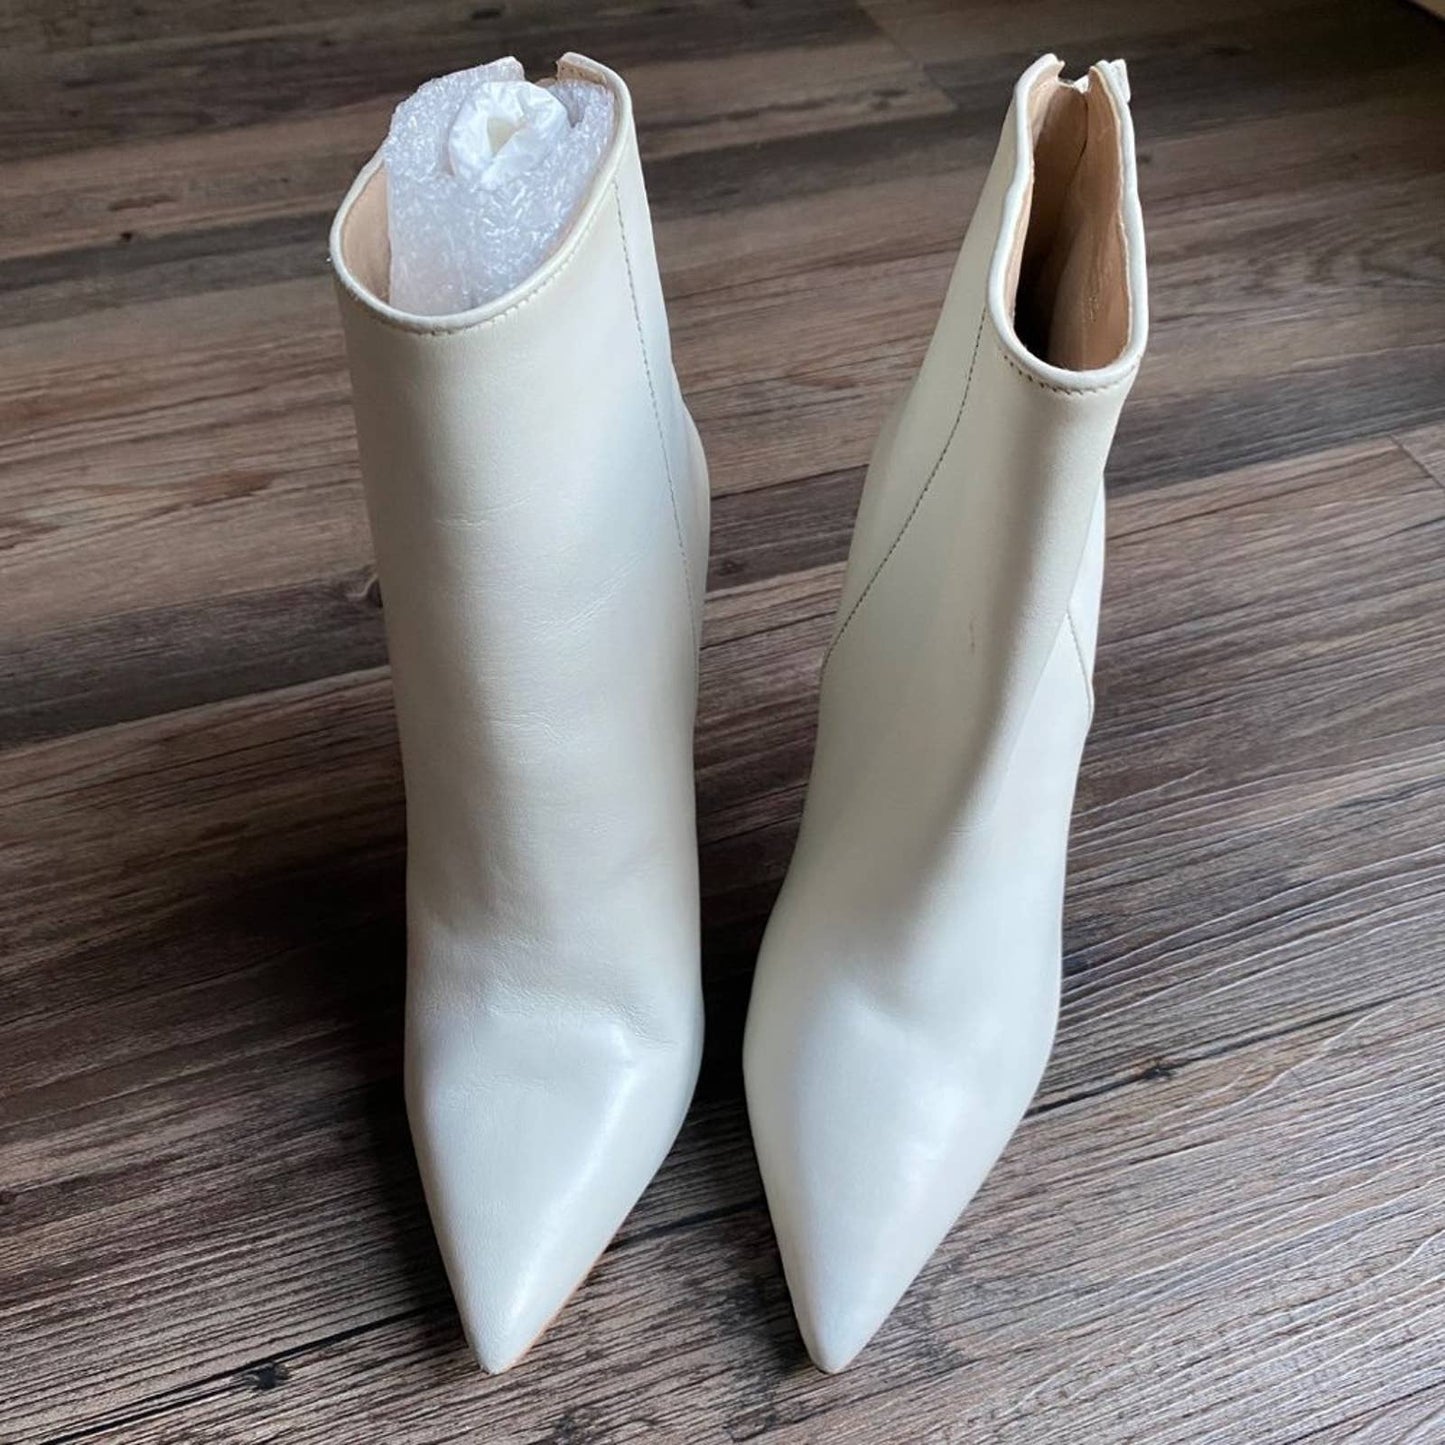 Steve Madden sz 6M Womens Via Leather Pointed Toe Ankle Boots Ivory